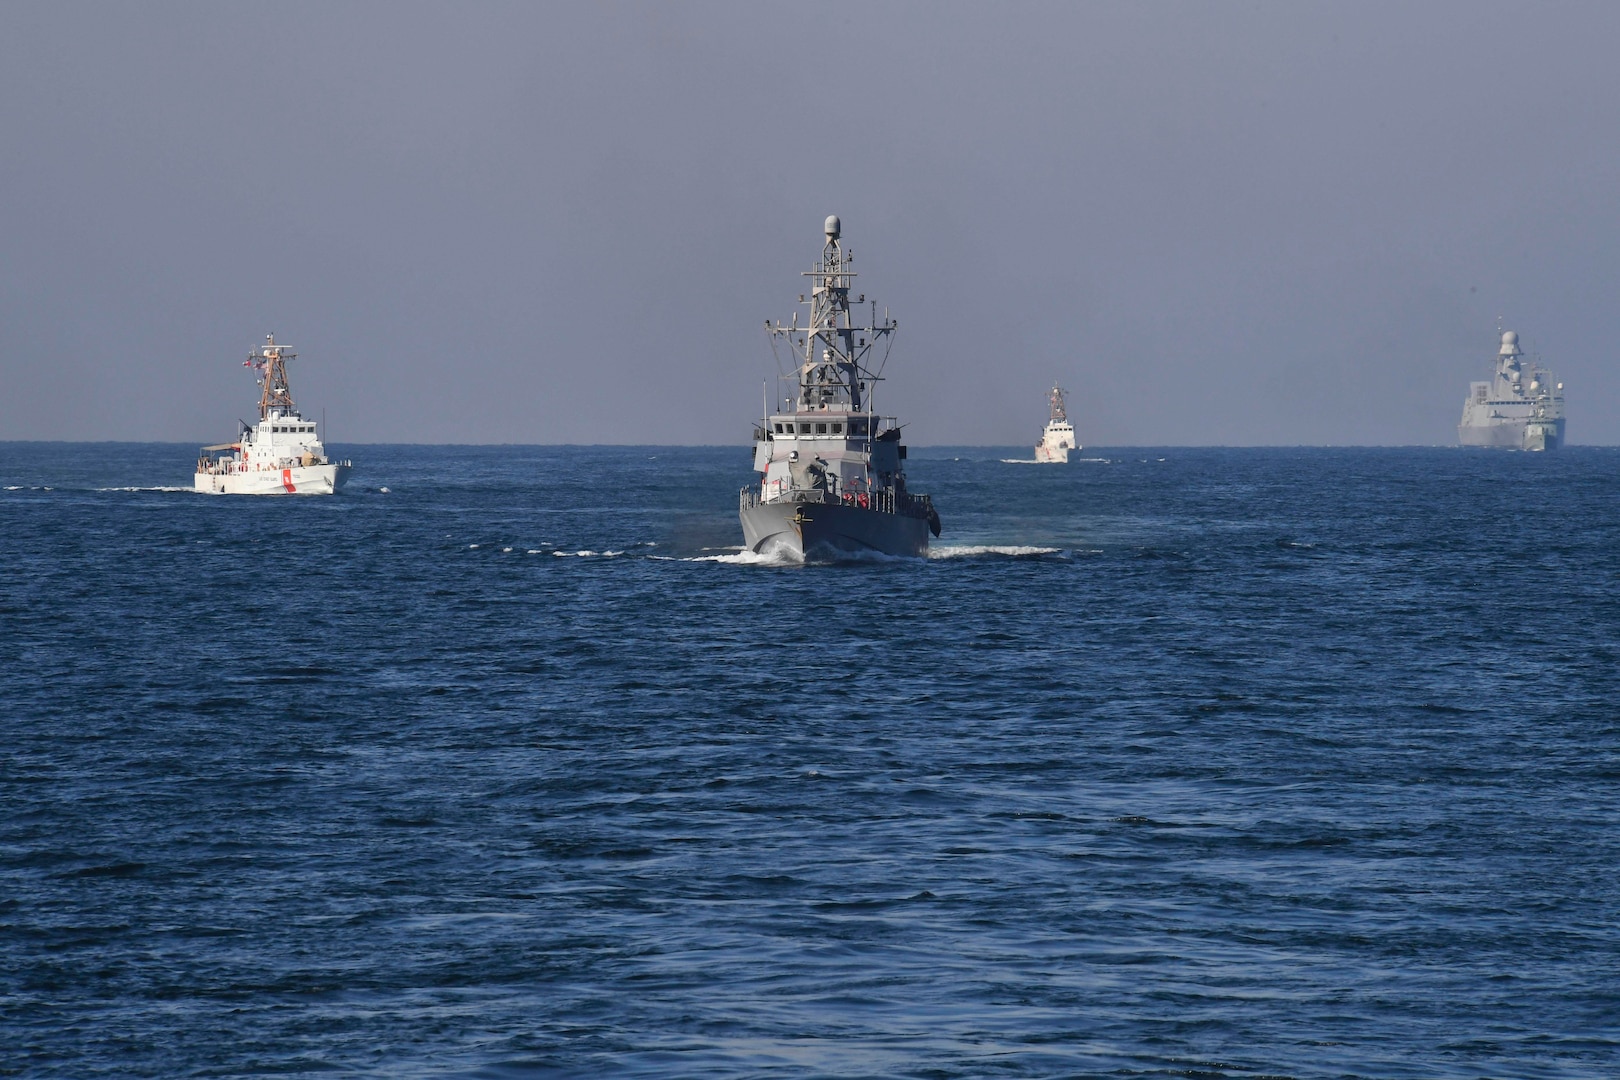 180206-N-TB177-0558 U.S. 5TH FLEET AREA OF OPERATIONS (Feb. 6, 2018) Ships from the U.S. Navy, U.S. Coast Guard, Royal Navy of Oman and France’s Marine Nationale practice maneuvering techniques during exercise Khunjar Haad. Khunjar Haad  is a multilateral, surface, air and explosive ordnance disposal exercise with the U.S. Navy, U.S. Coast Guard, Royal Navy of Oman, France’s Marine Nationale and United Kingdom’s Royal Navy in order to enhance interoperability, mutual capability and support long-term regional cooperation of forces in the Arabian Gulf. (U.S. Navy photo by Mass Communication Specialist 2nd Class Kevin J. Steinberg/Released)